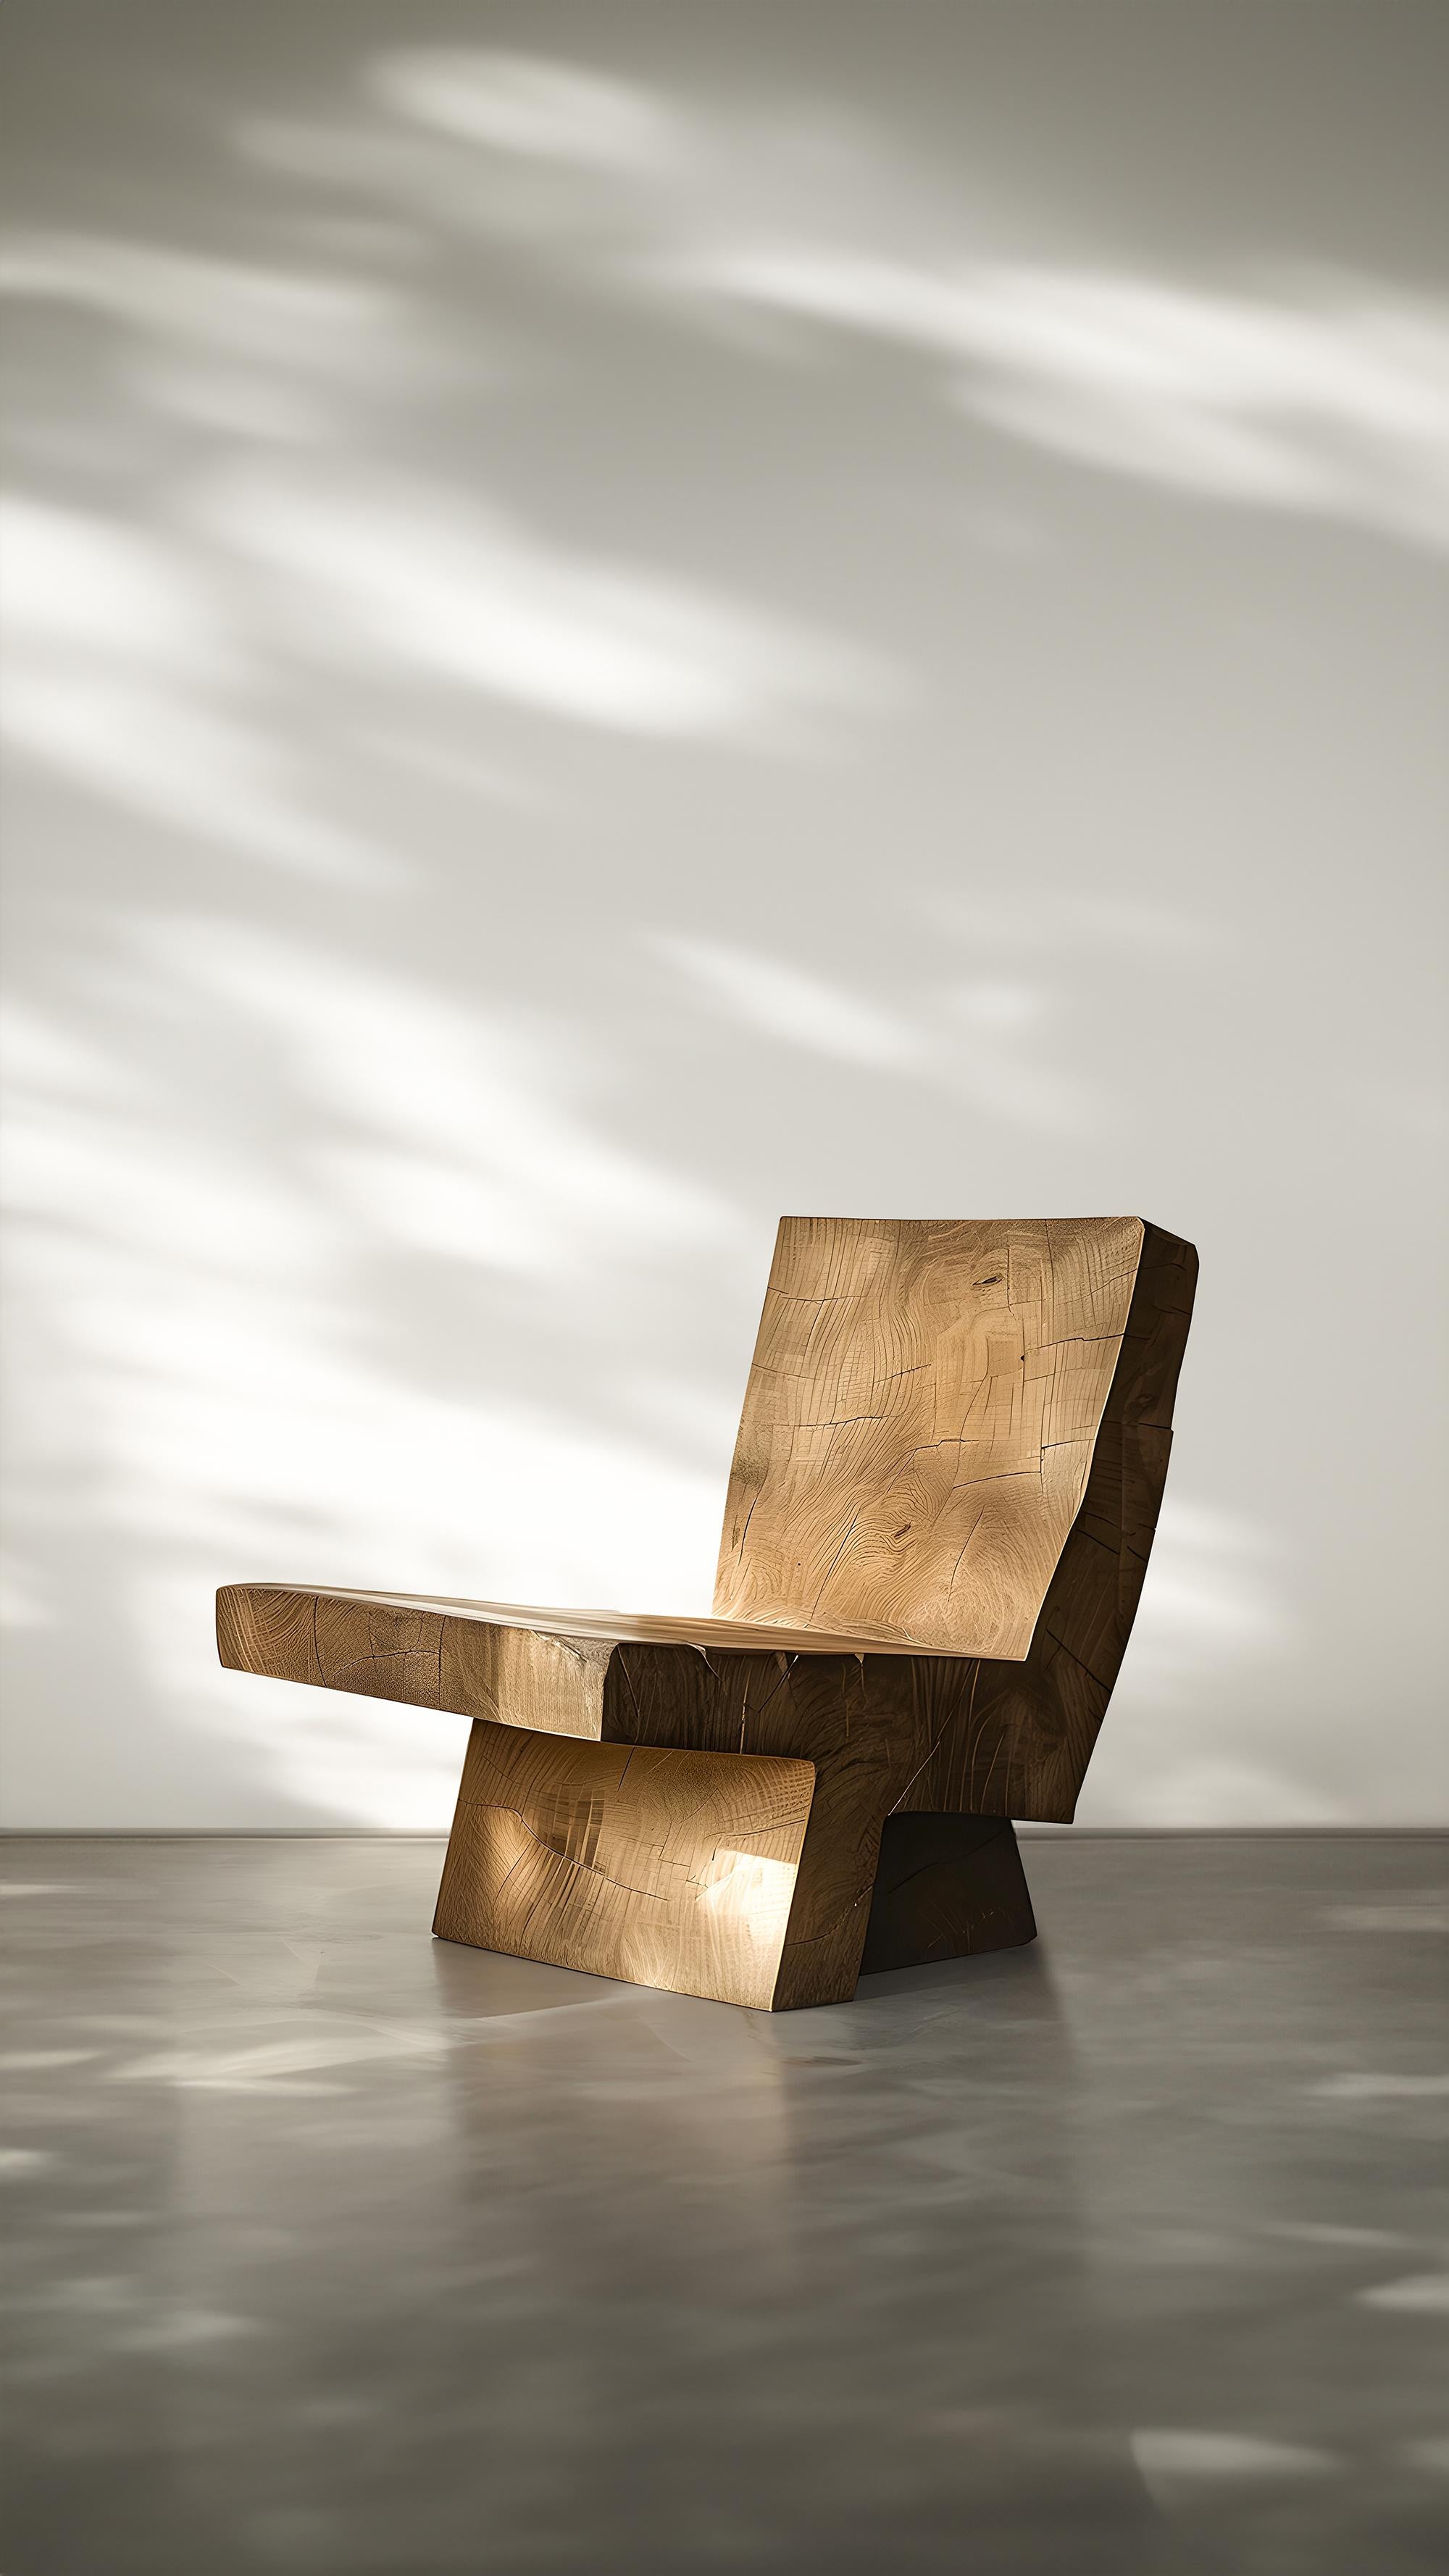 Hand-Crafted Solid Wood Chair Minimalist Design Muted by Joel Escalona No15 For Sale